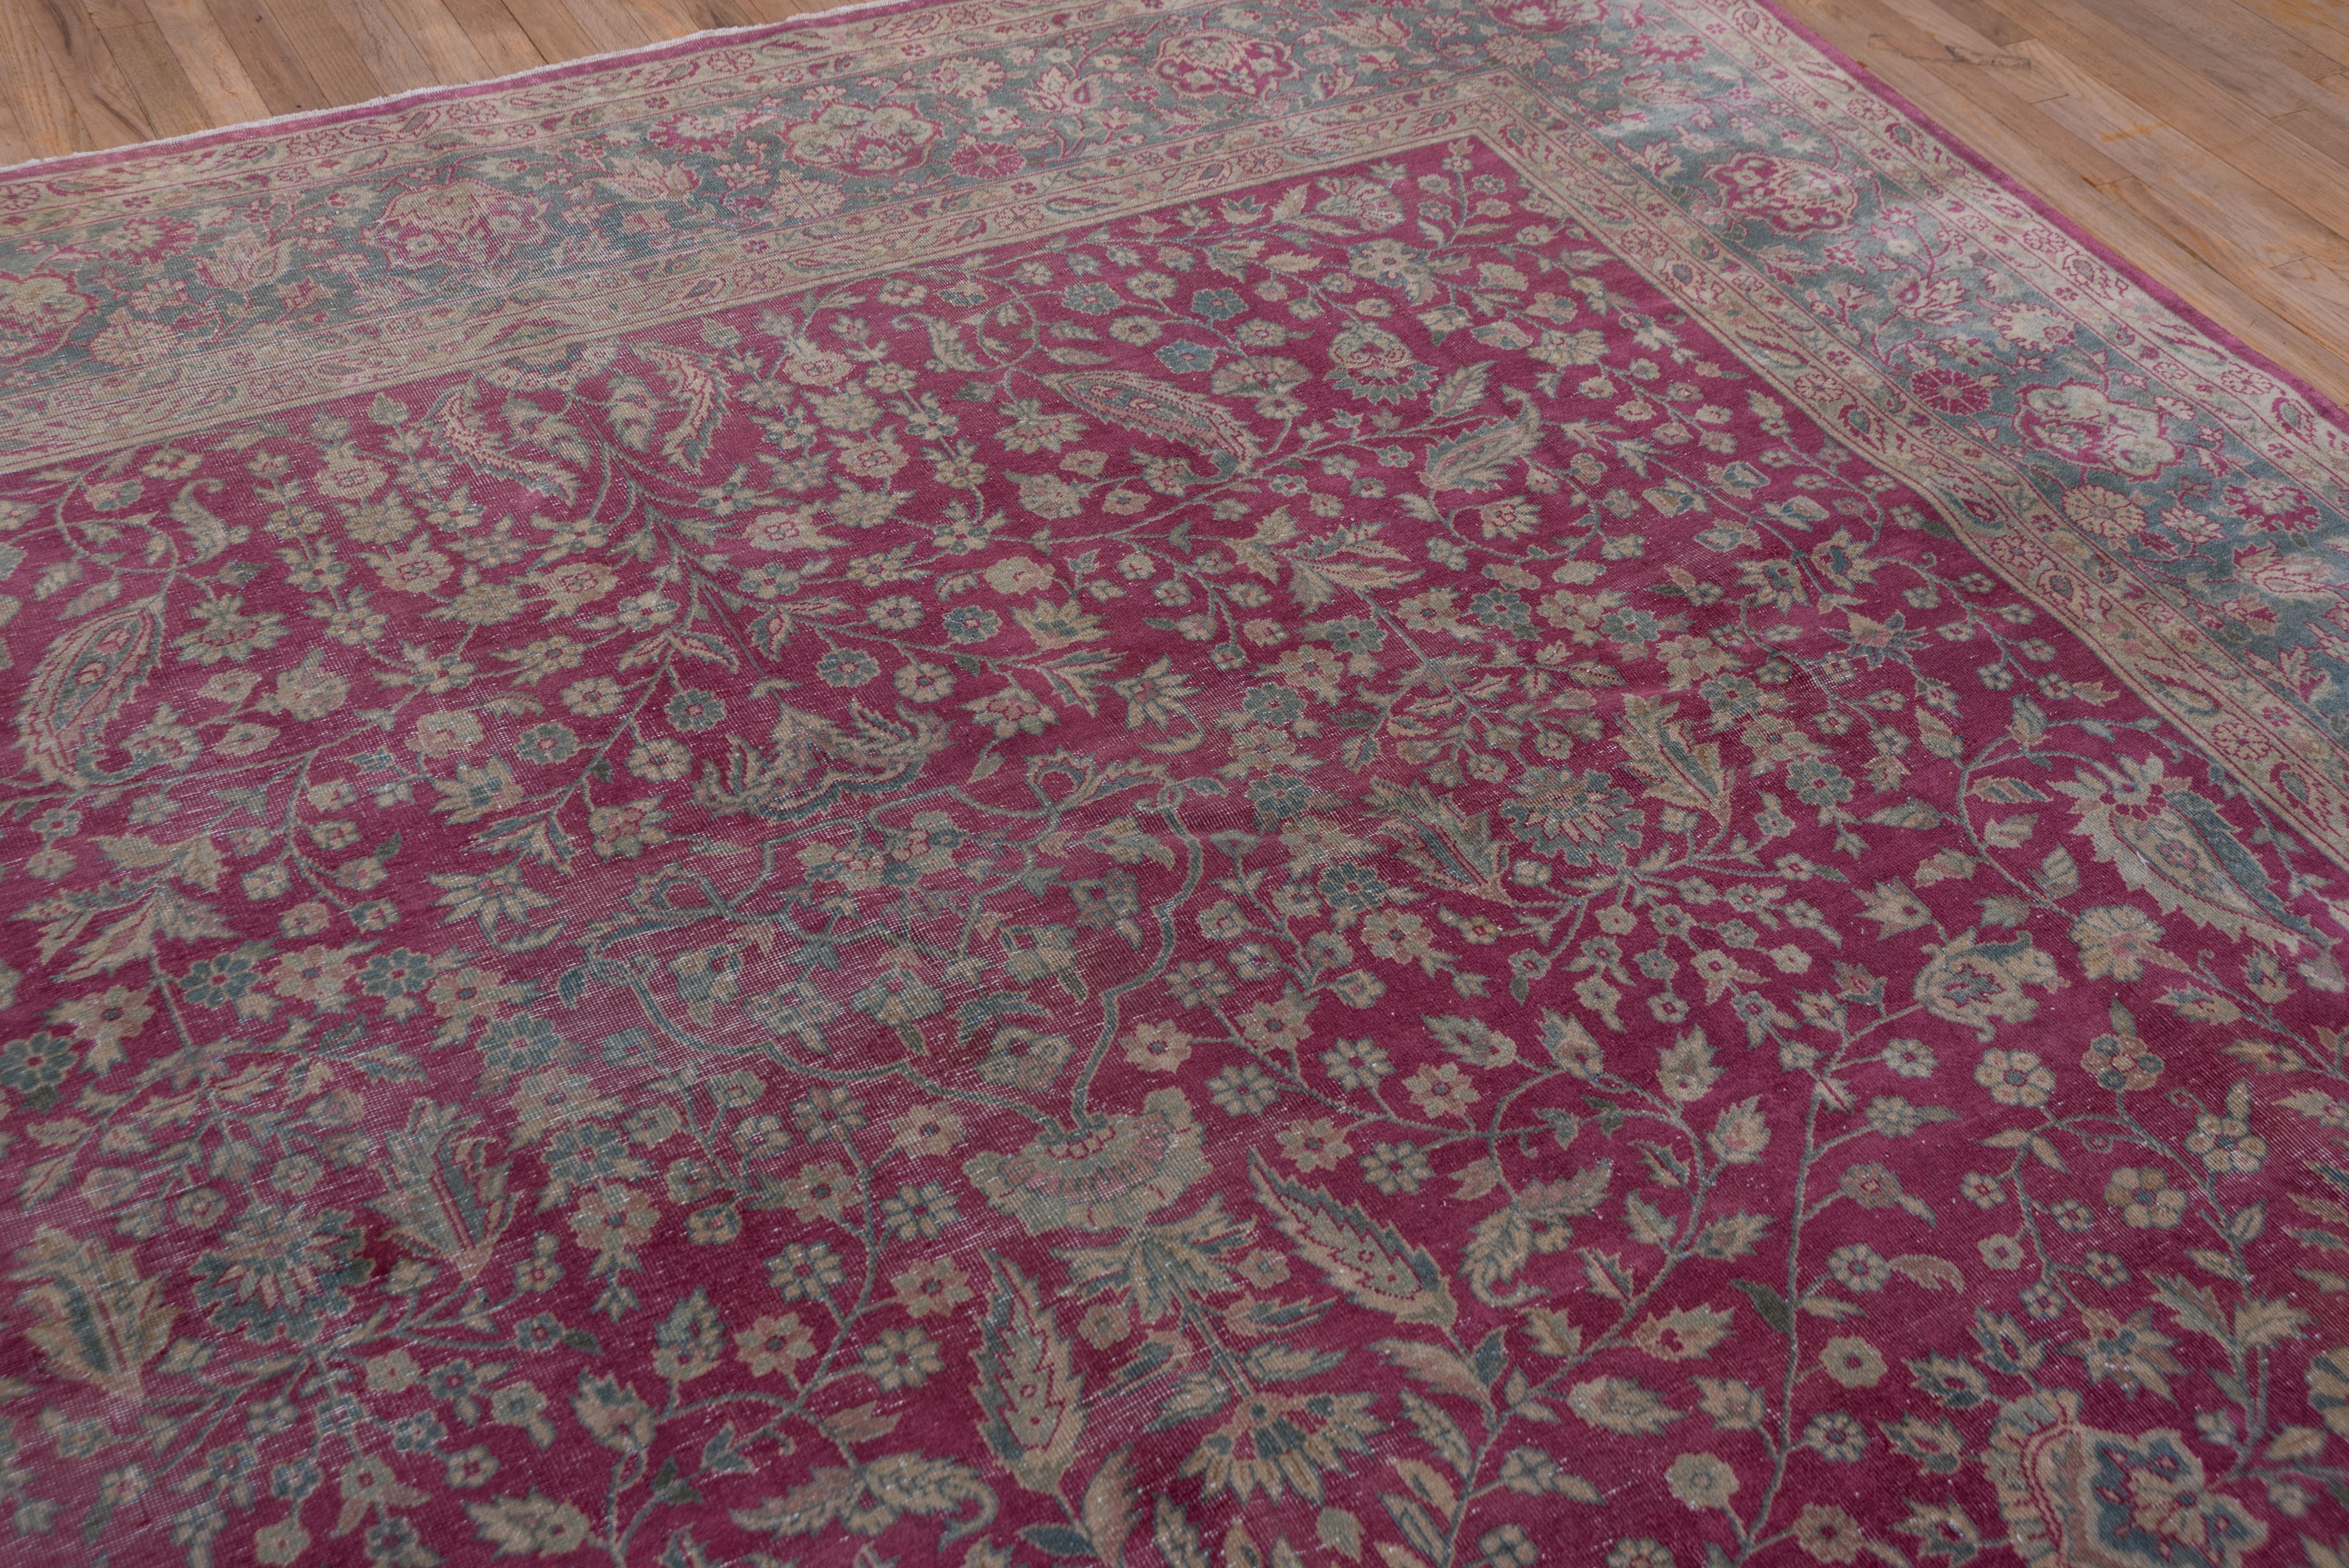 Antique Turkish Sivas Rug, Raspberry Red Field, Teal Borders, Circa 1930s For Sale 4